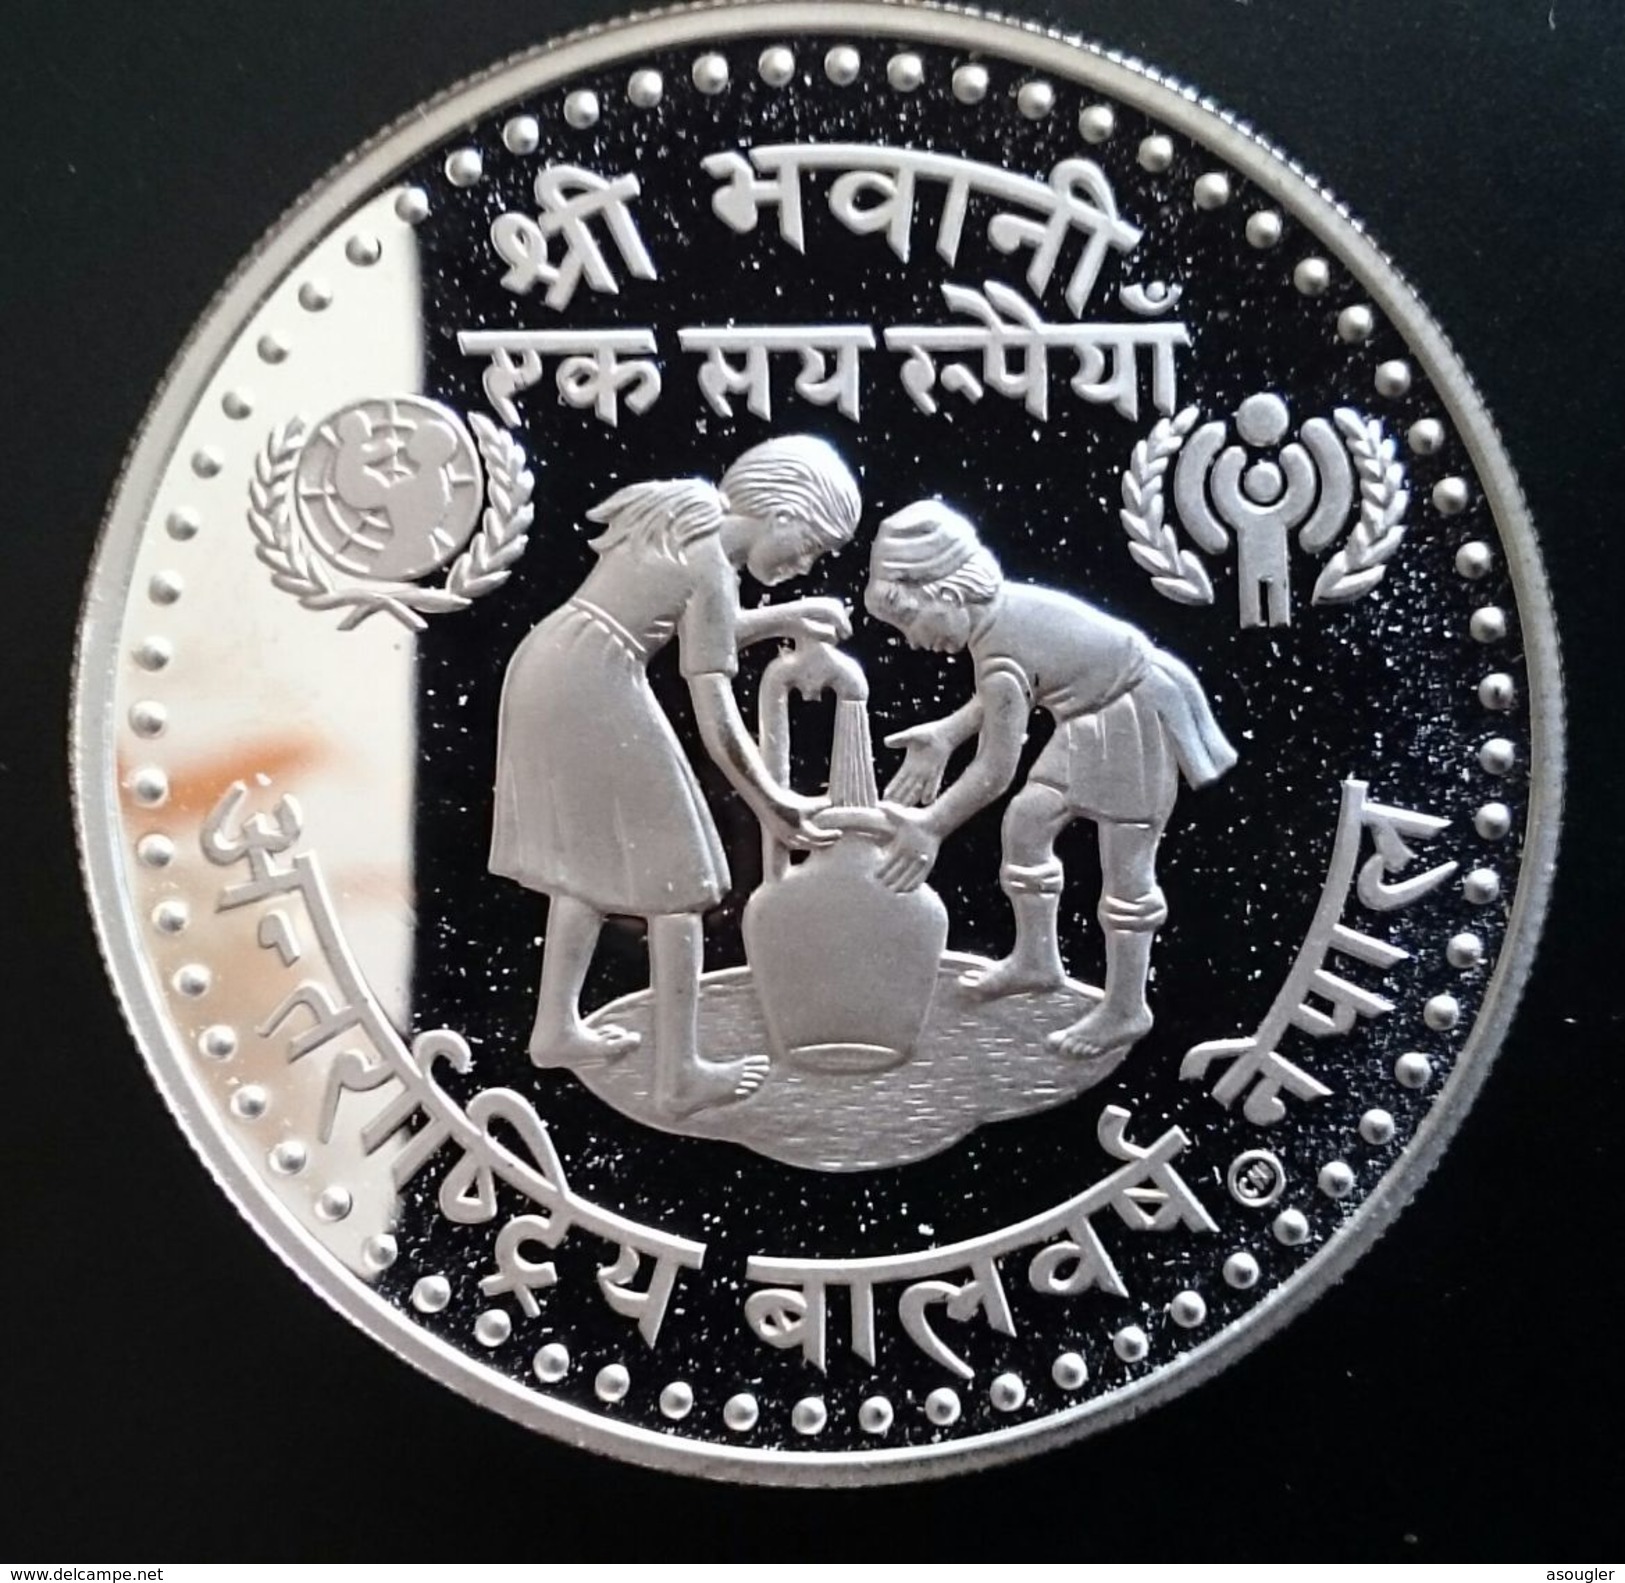 NEPAL 100 RUPEE ND 1974 - 1981 SILVER PROOF "International Year Of The Child" Free Shipping Via Registered Air Mail - Népal